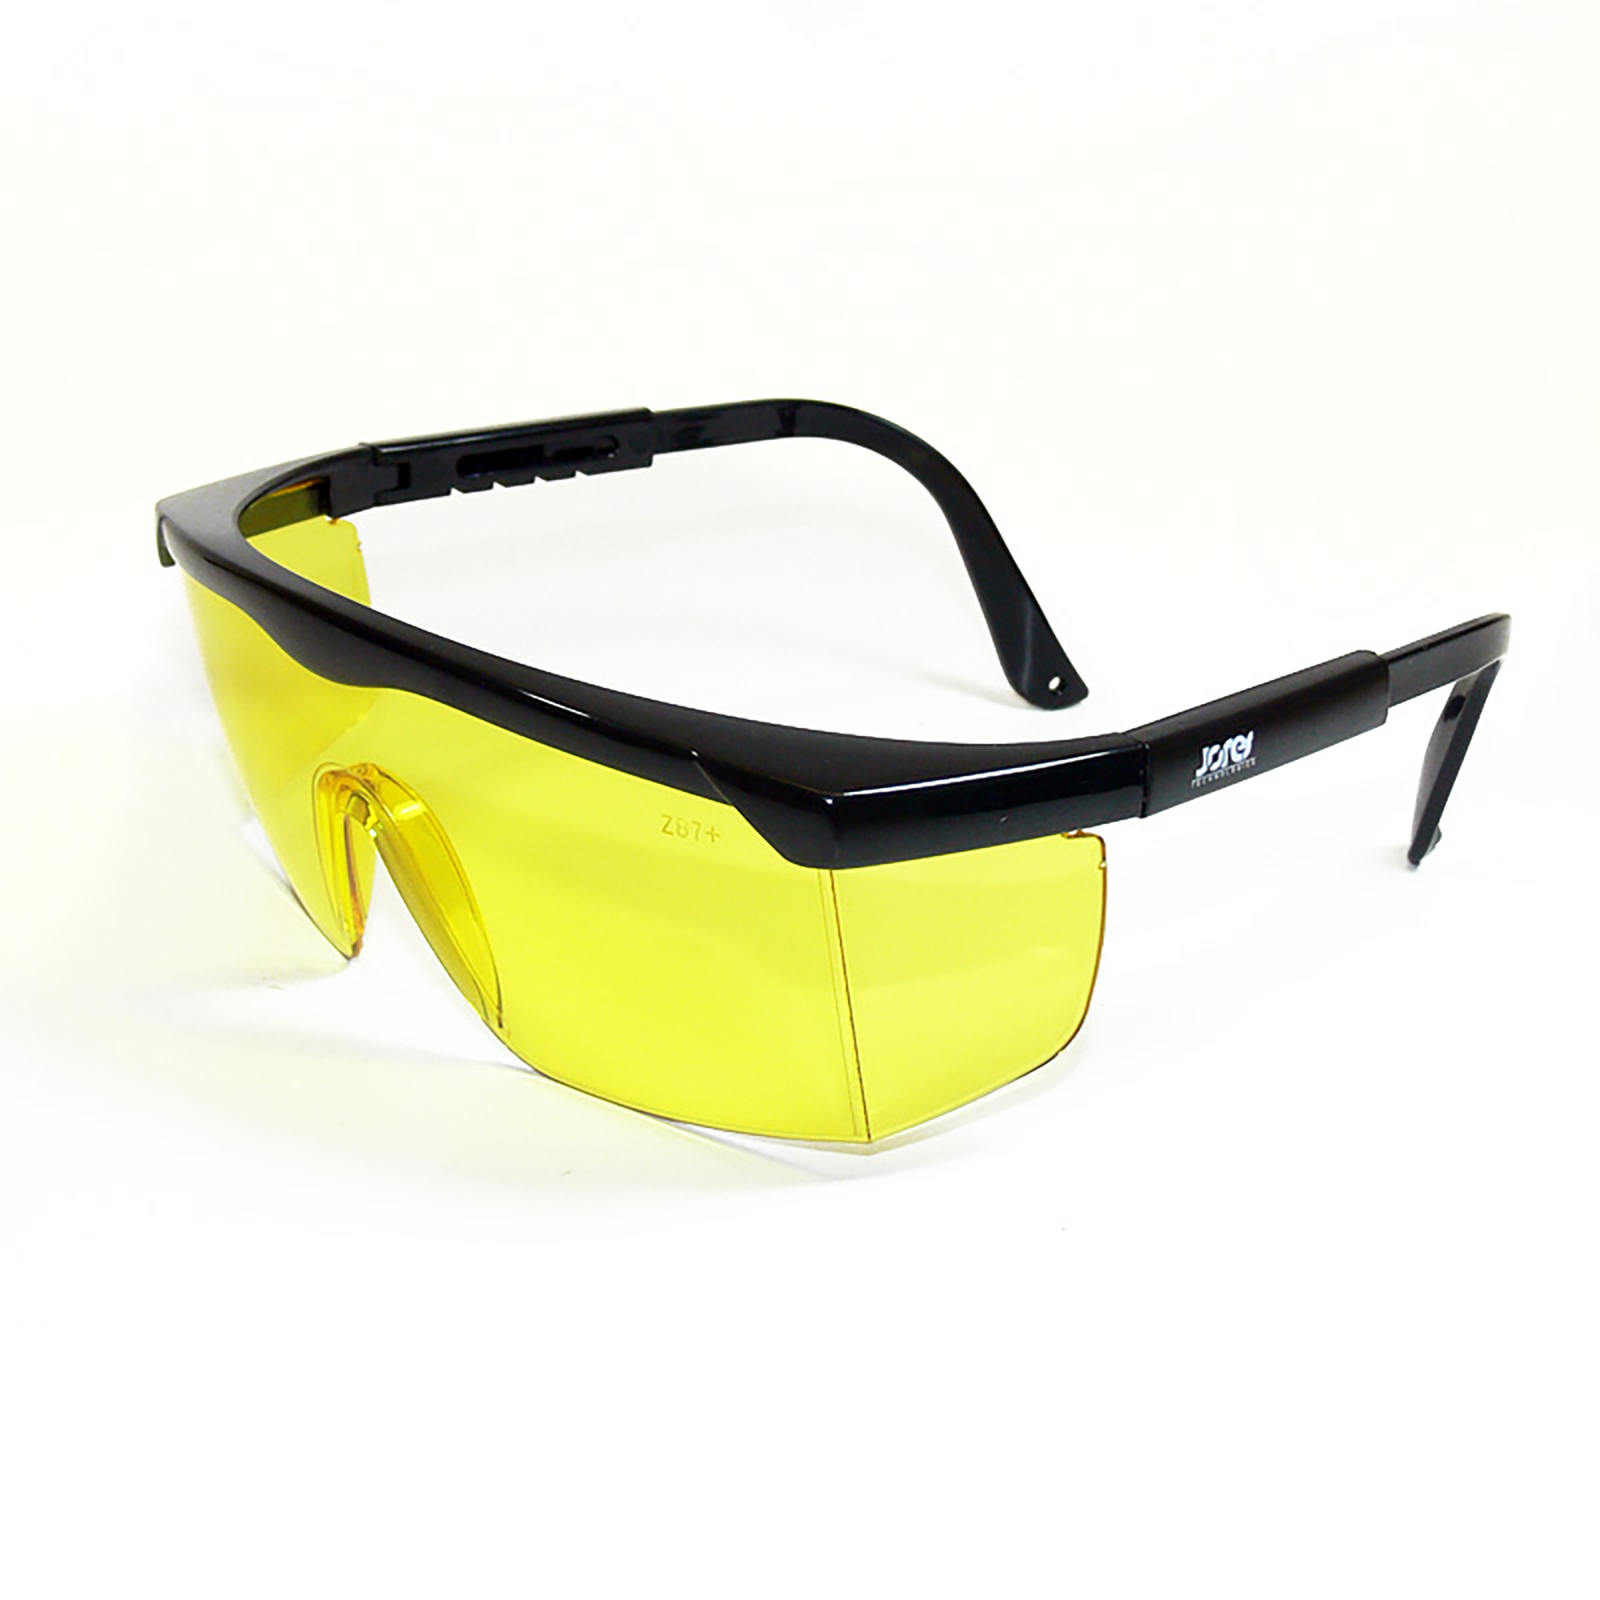 Framed Rectangular Safety Glasses with Side Shields for High Impact  Protection